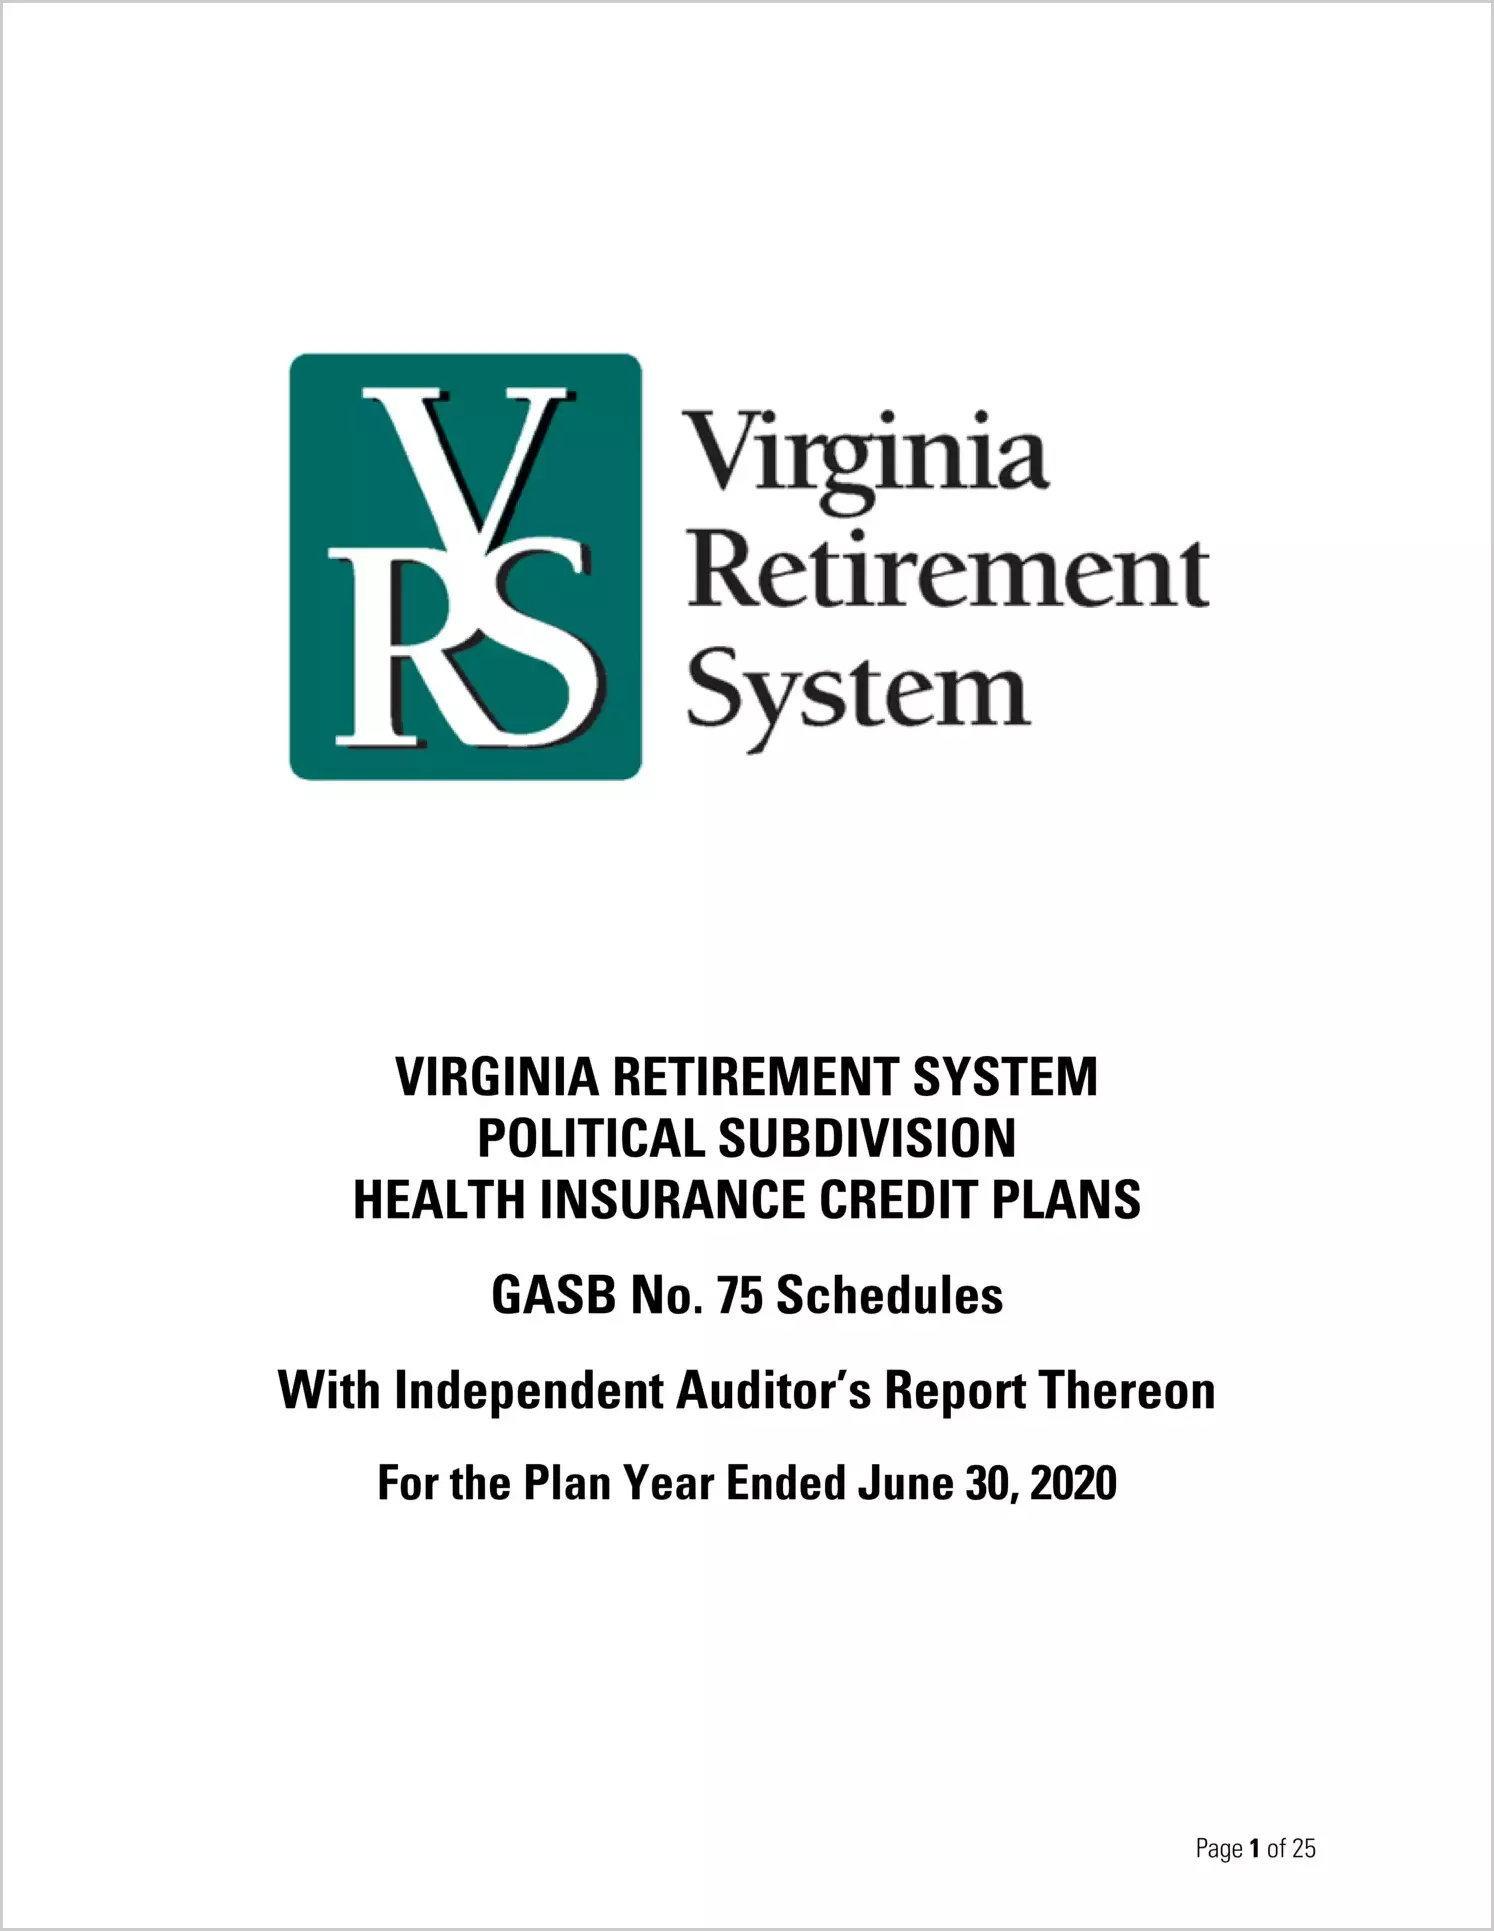 GASB 75 Schedules - Virginia Retirement System Political Subdivision Health Insurance Credit Plans for the year ended June 30, 2020